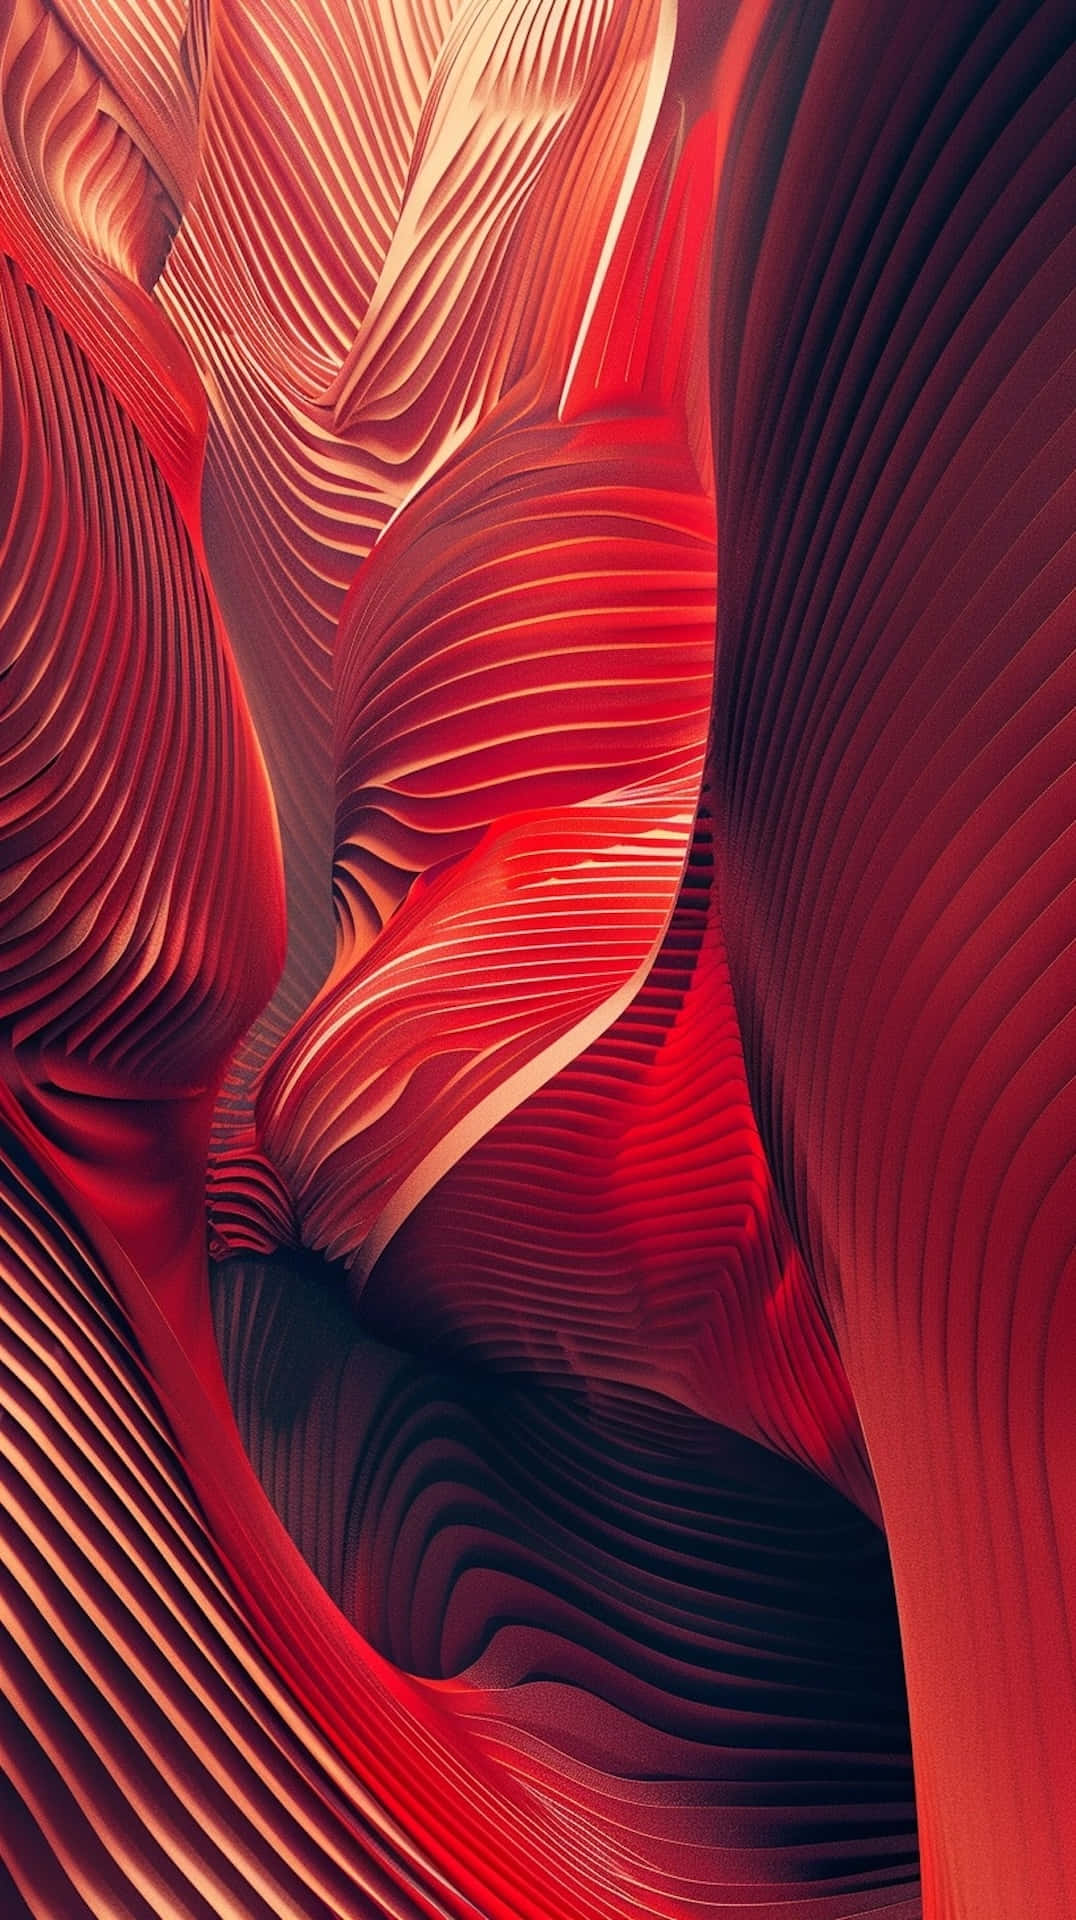 Abstract Red Wave Design Wallpaper